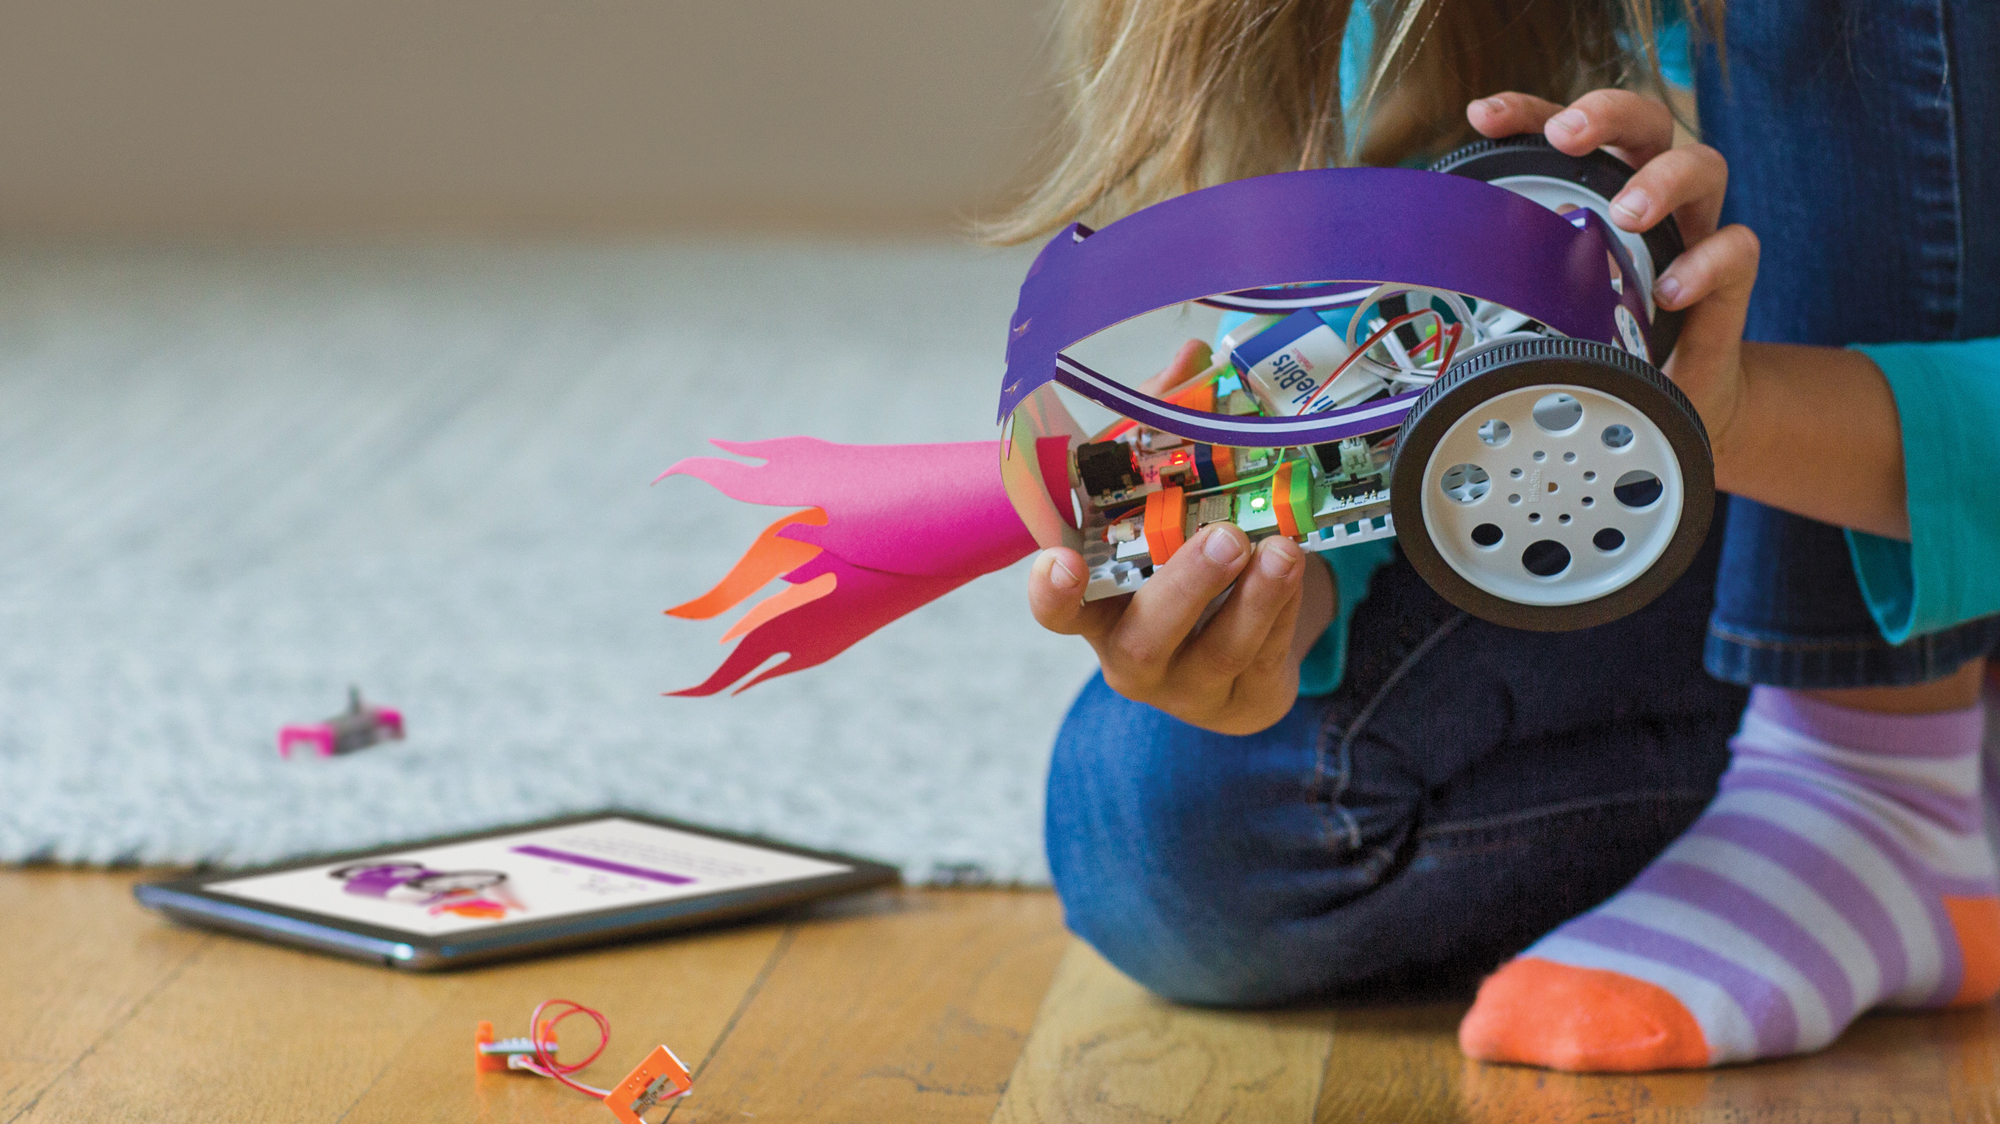 The Newest LittleBits Building Block Is Your Smartphone